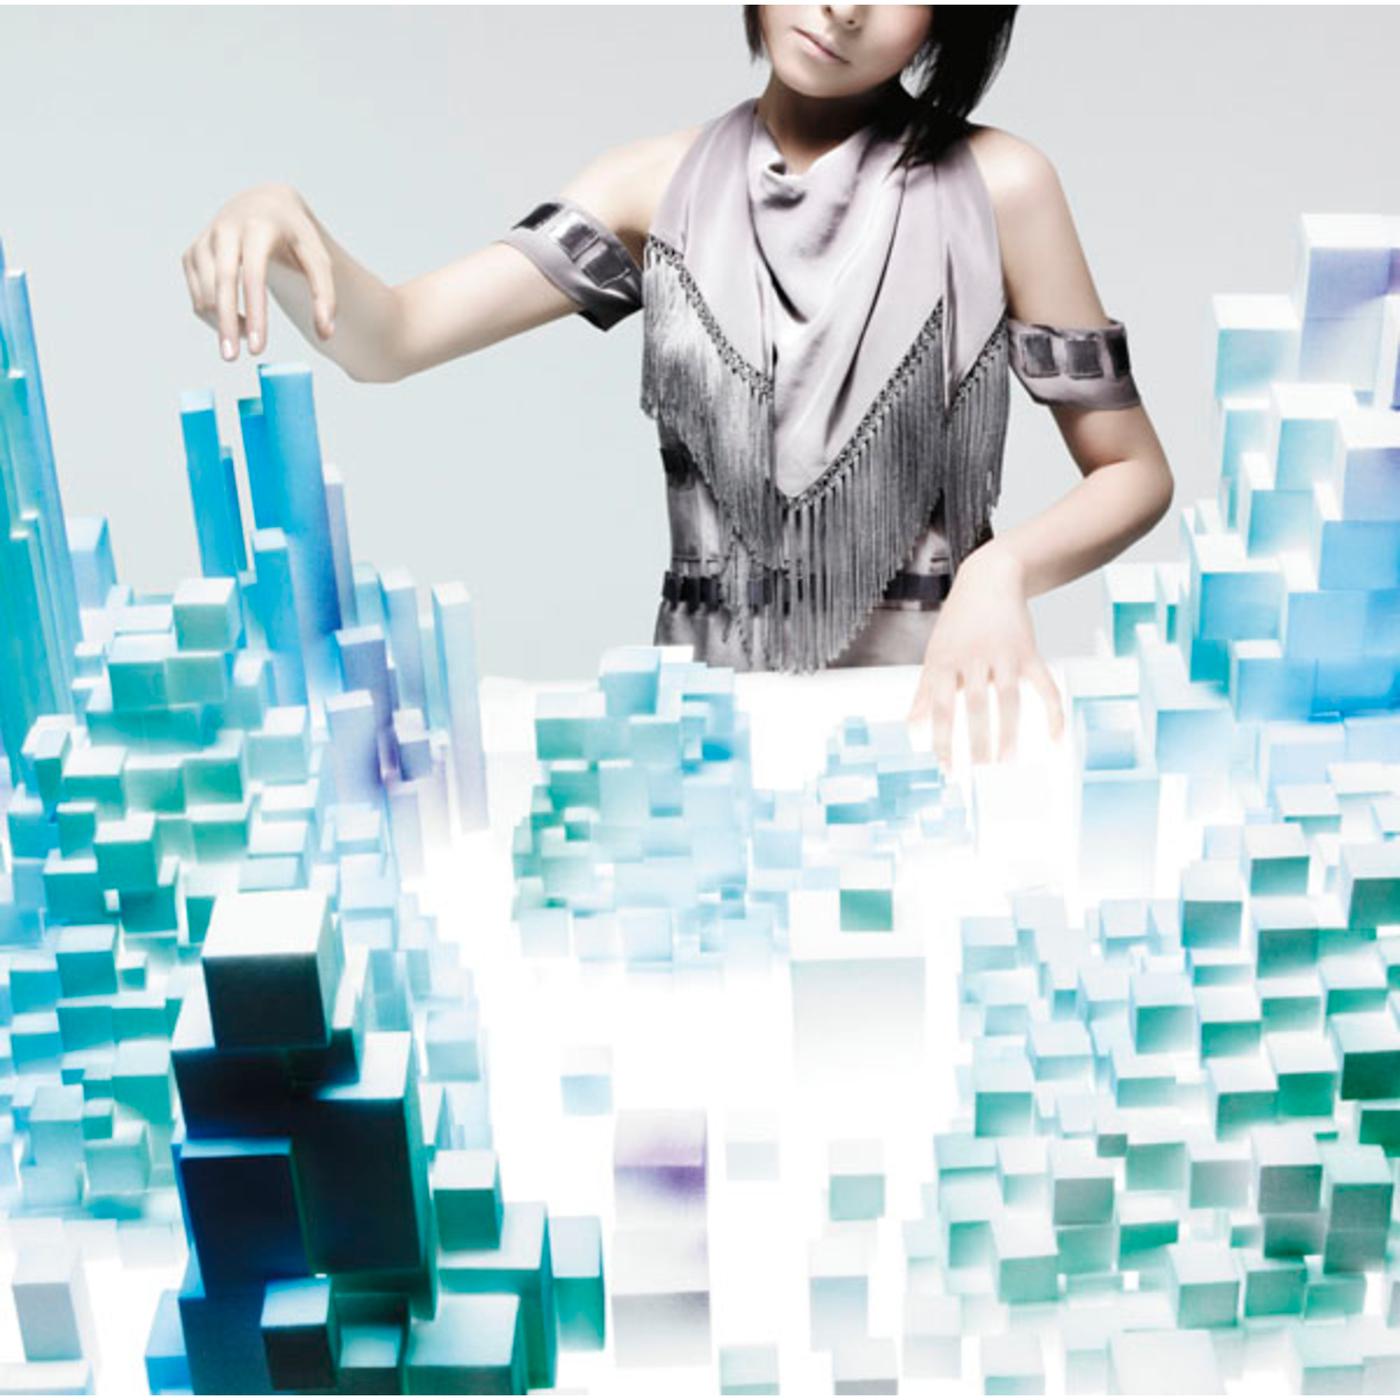 School Food Punishment - after laughter